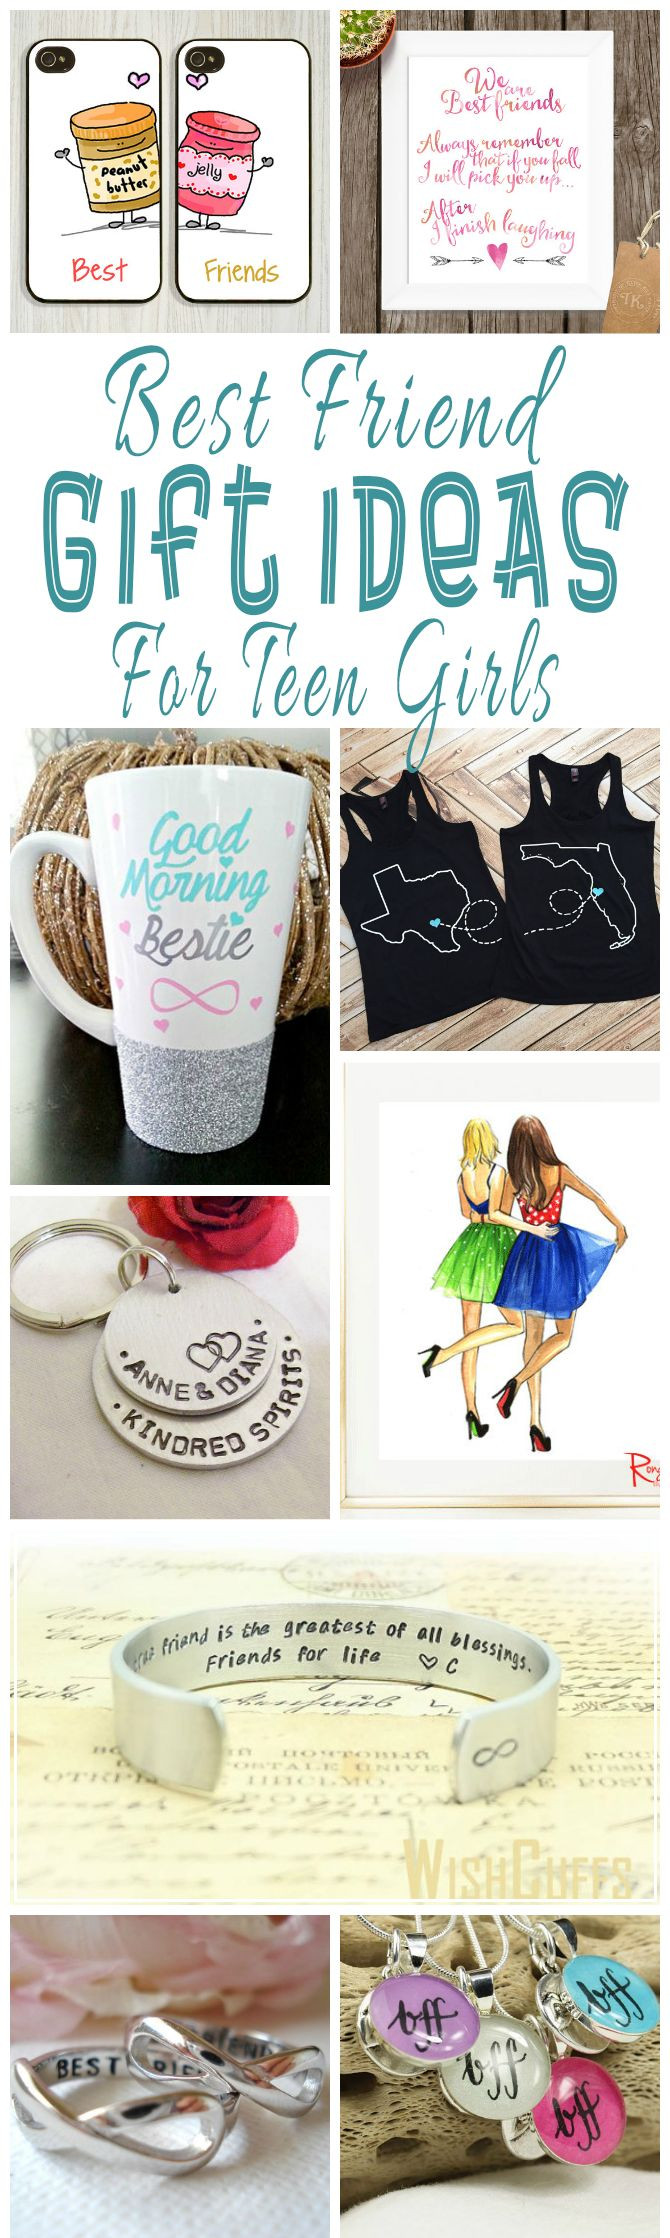 Mother'S Day Gift Ideas For Friends
 1000 ideas about Best Friend Gifts on Pinterest